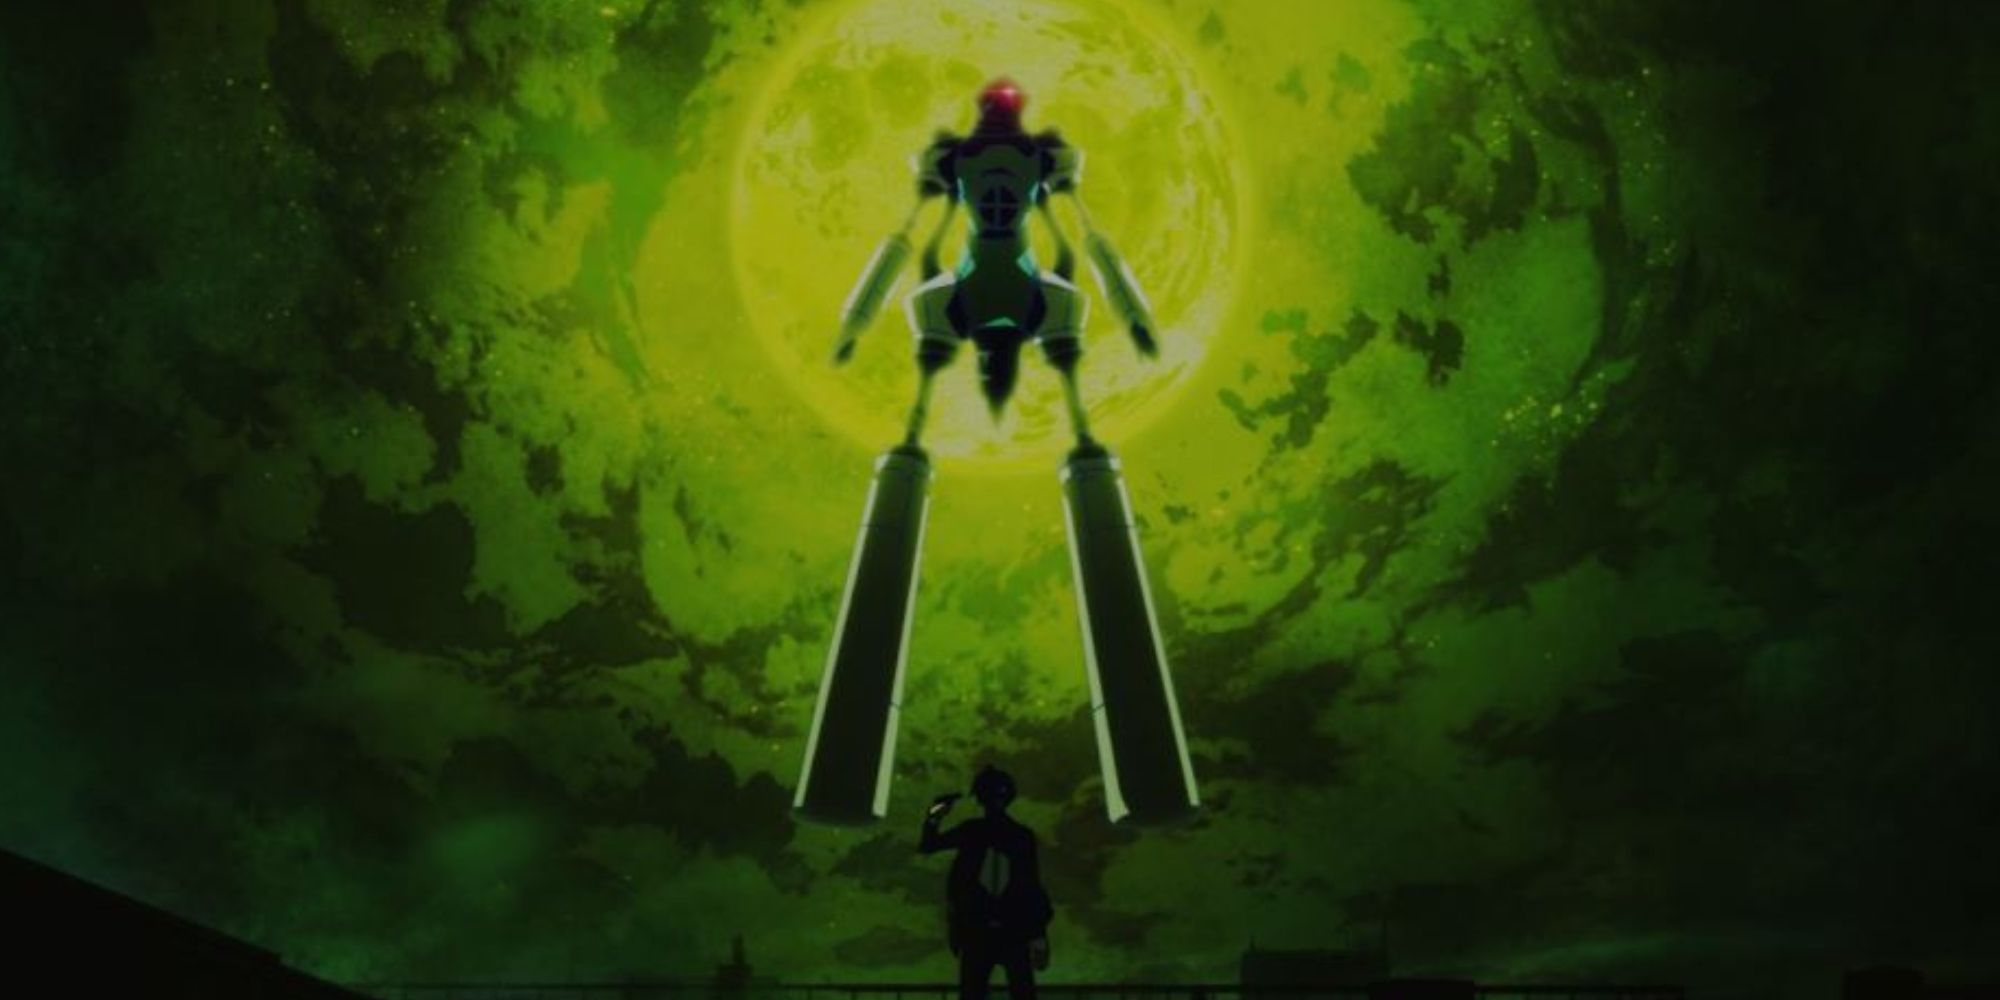 The tall Persona Orpheus looming above the Persona 3 protagonist, a green full moon behind keeping them in shadows. 